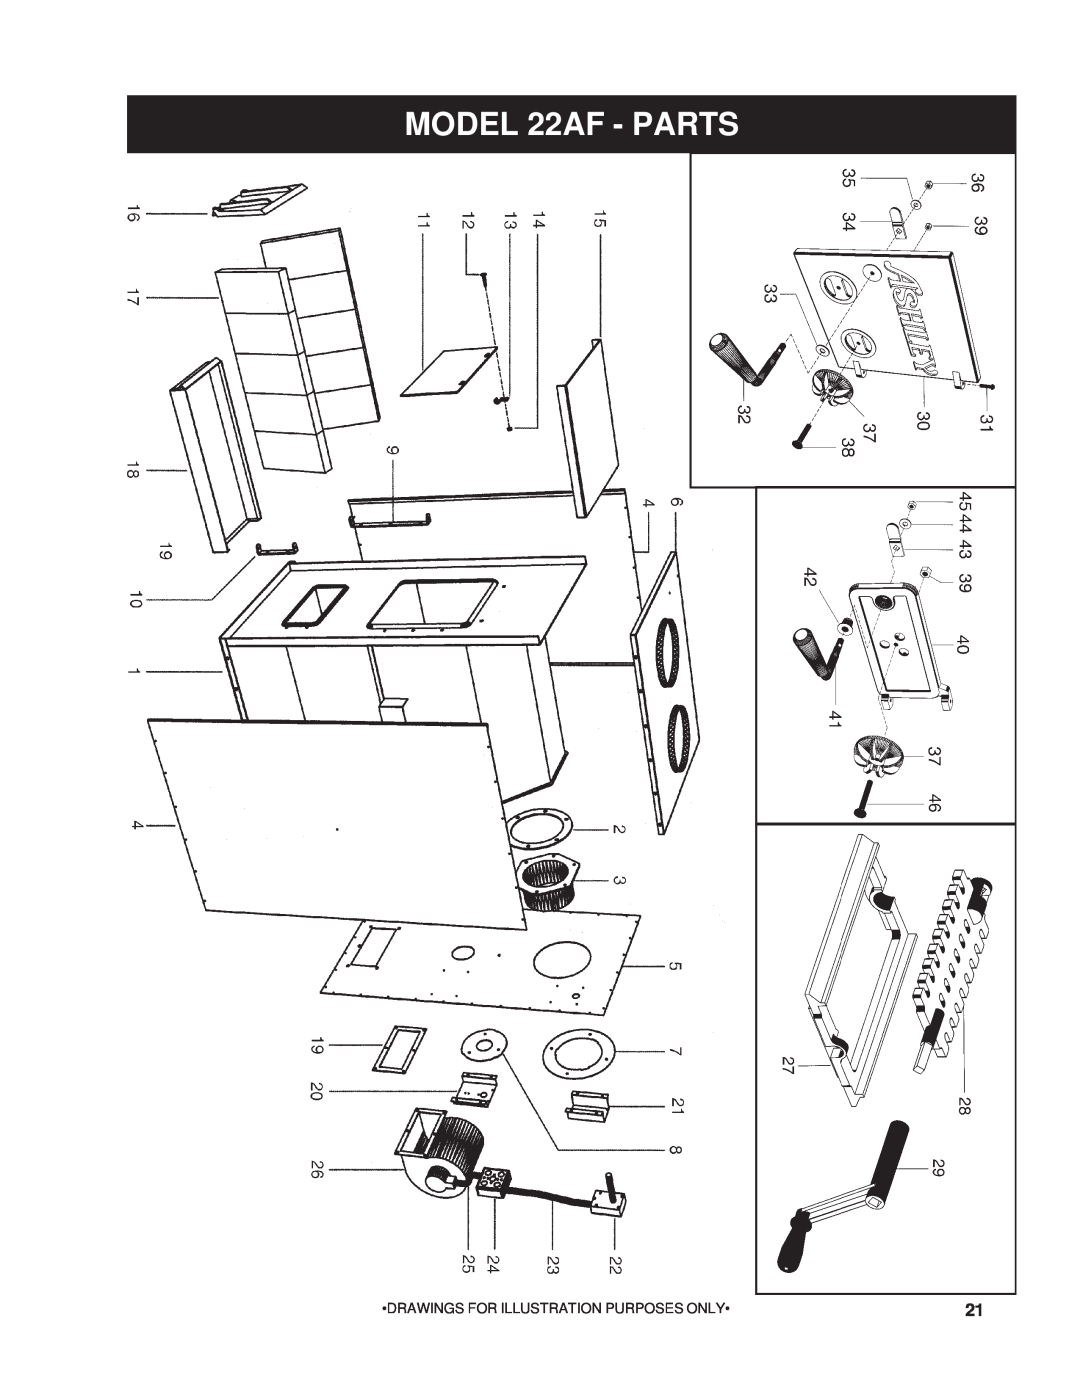 United States Stove owner manual MODEL 22AF - PARTS, Drawings For Illustration Purposes Only 